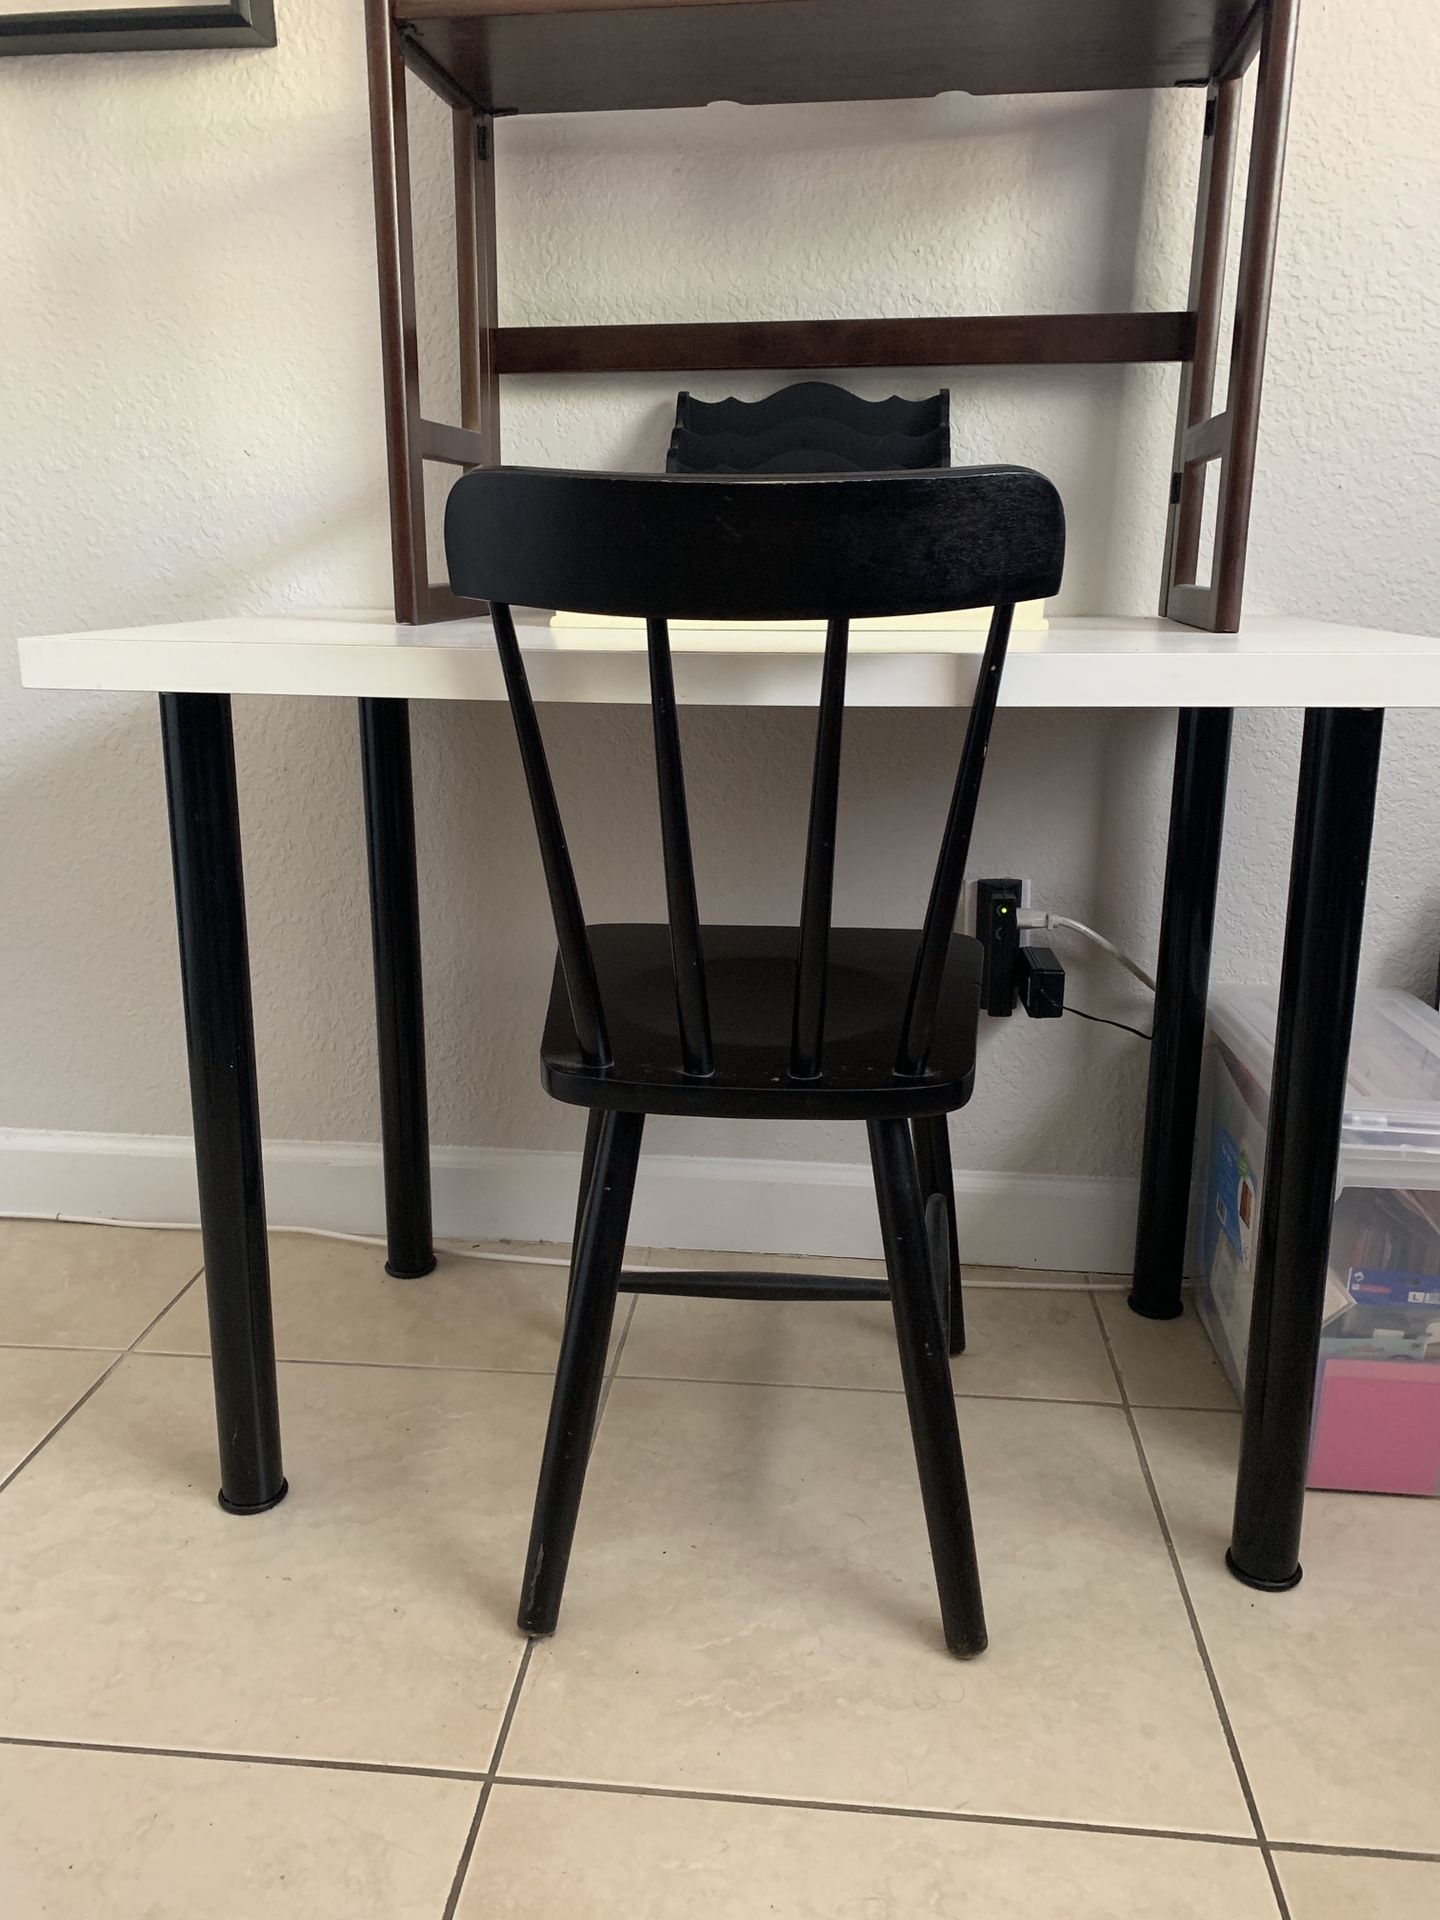 IKEA Desk and chair